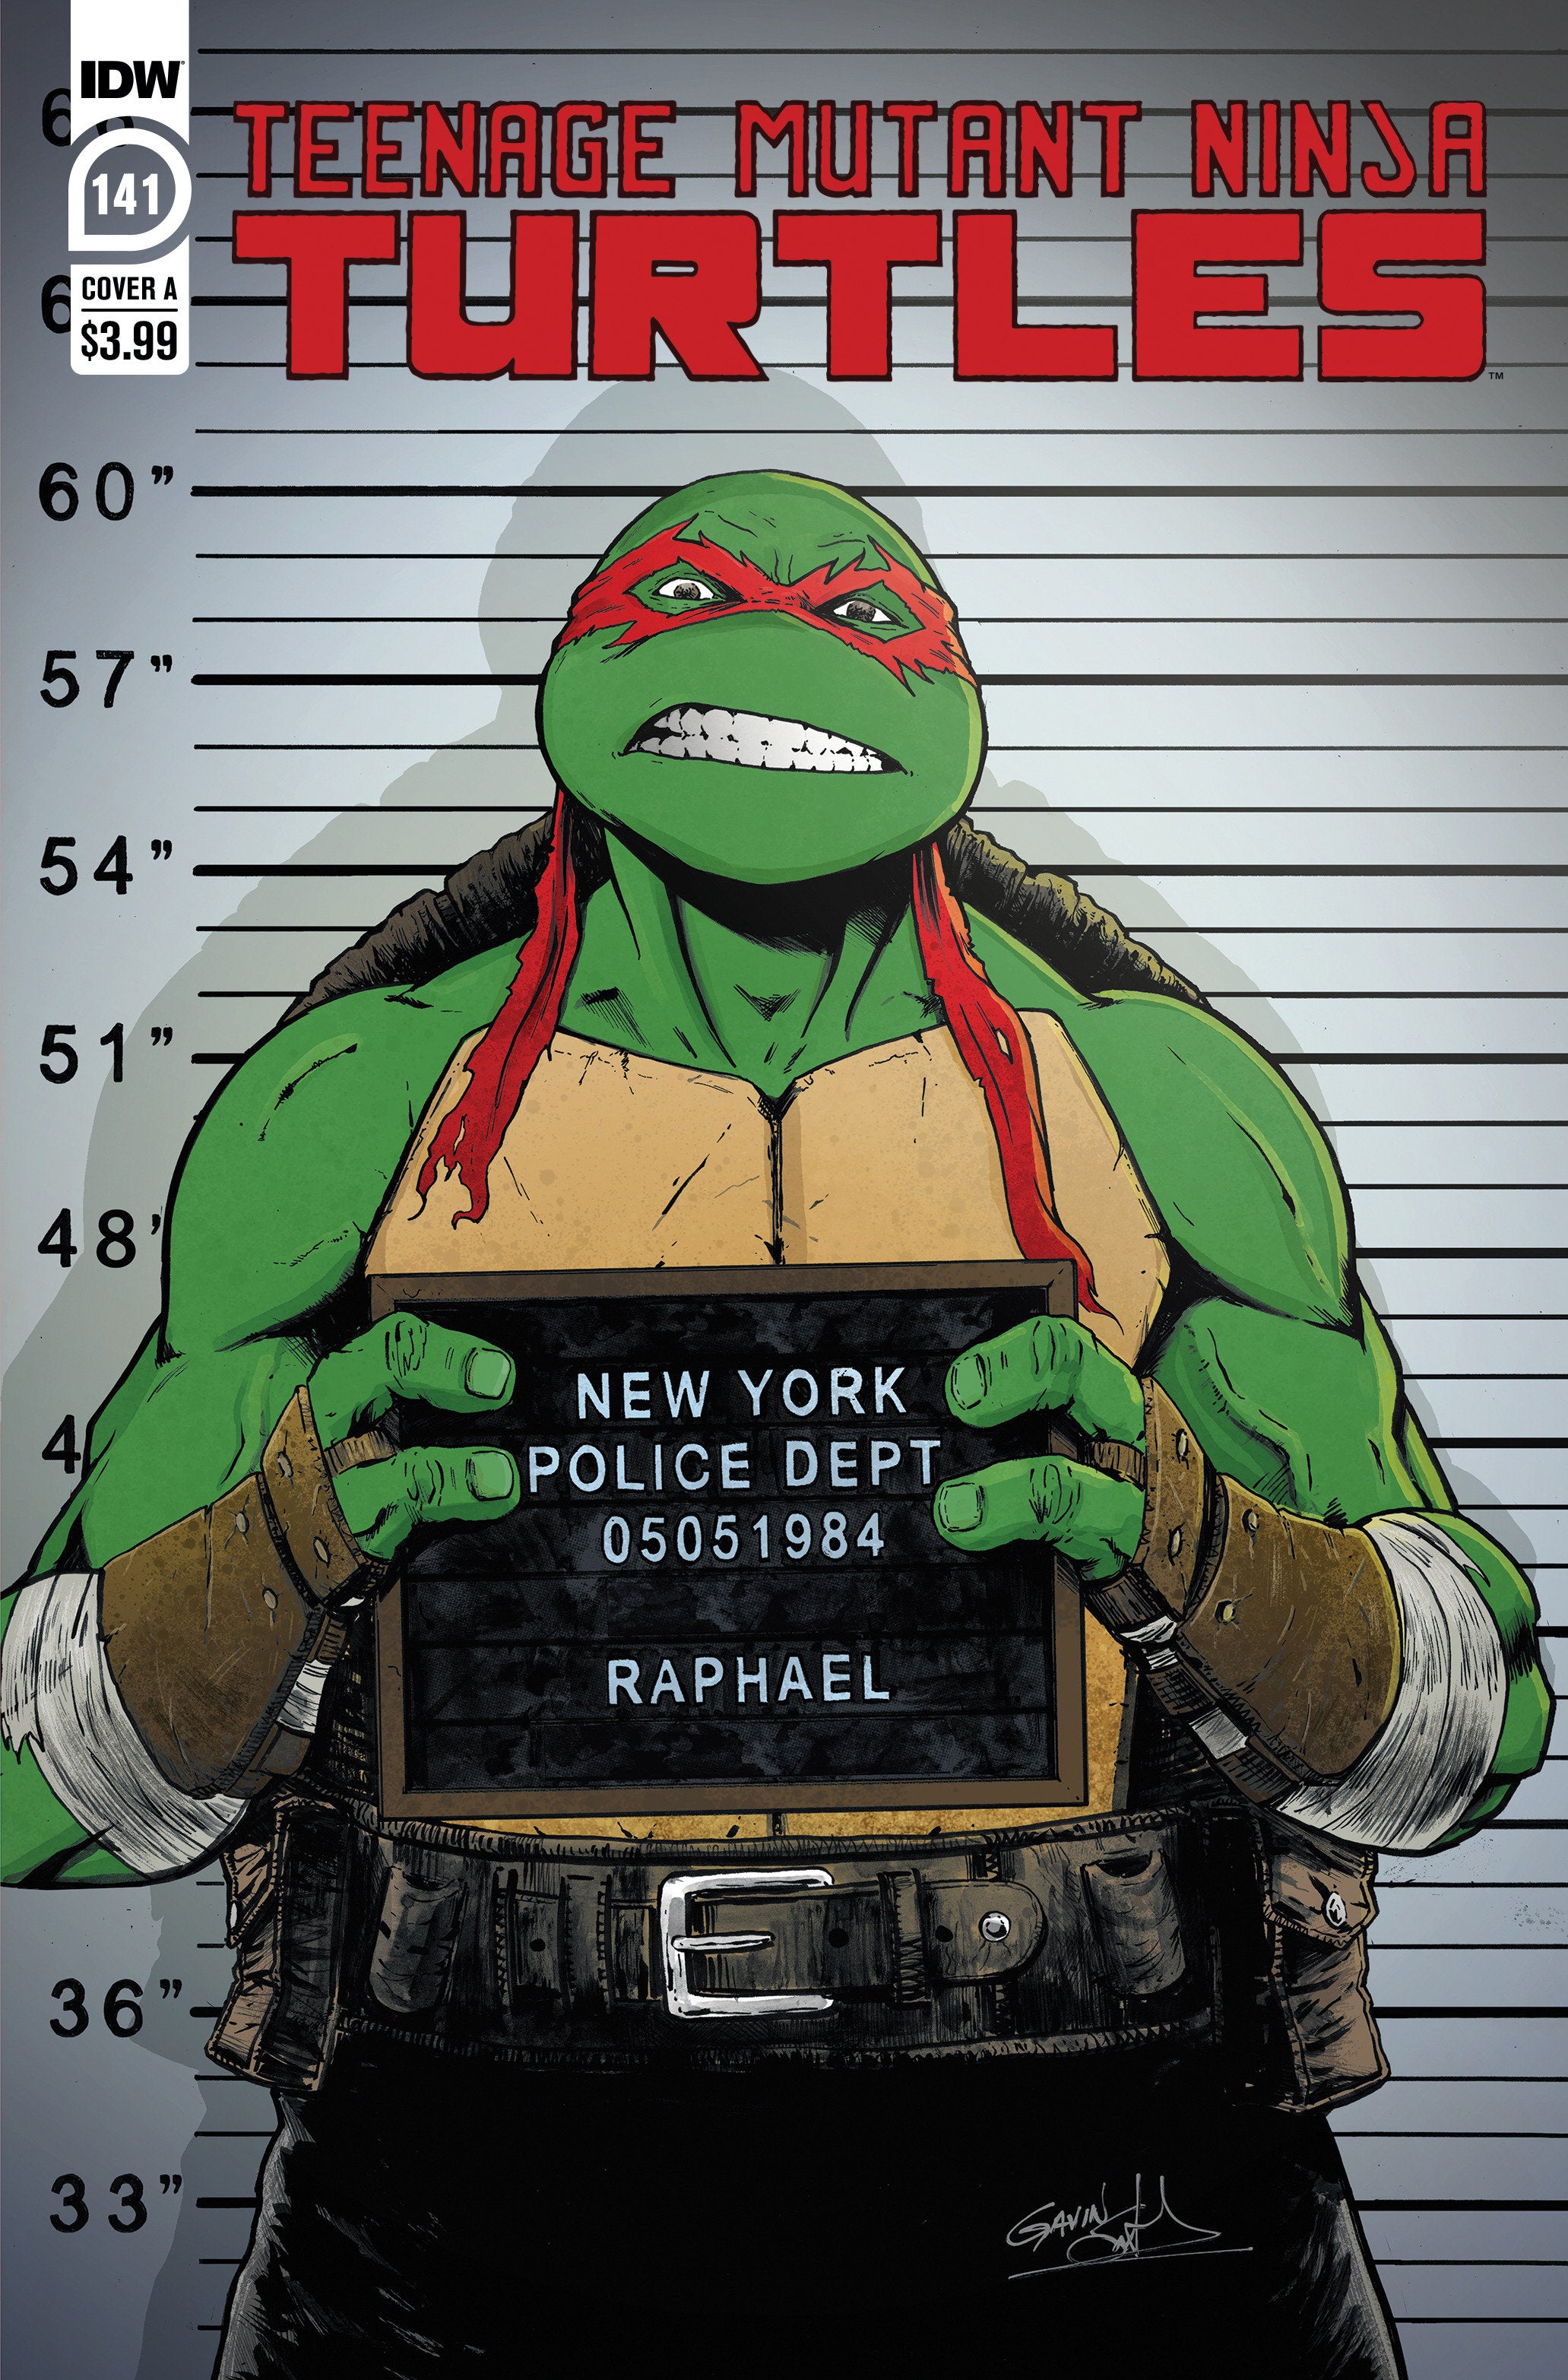 Teenage Mutant Ninja Turtles #141 Cover A (Smith) | Game Master's Emporium (The New GME)